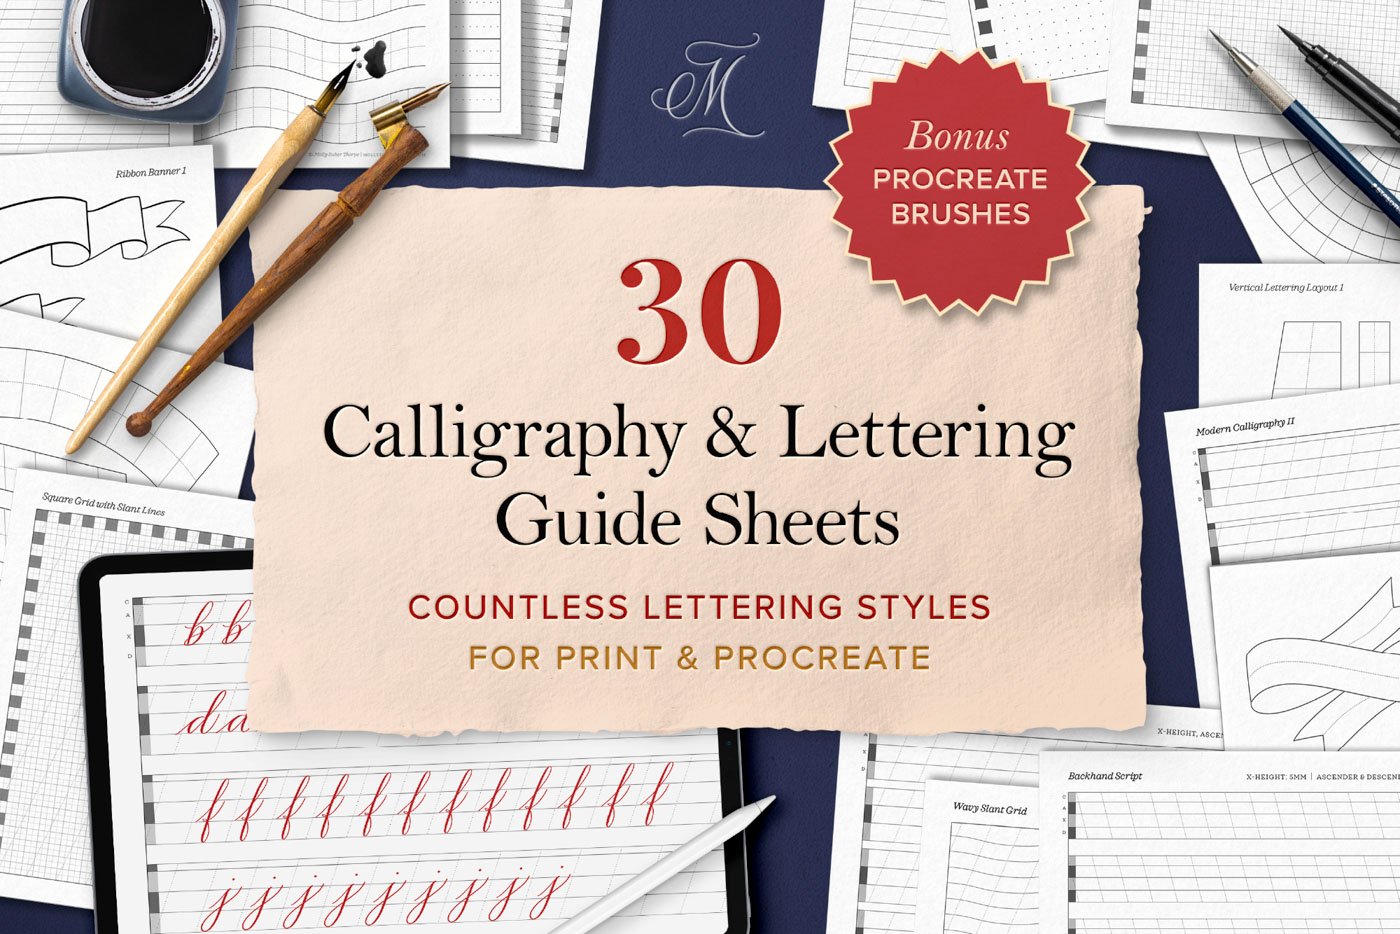 Calligraphy Guide Sheet - wemakecollective.com